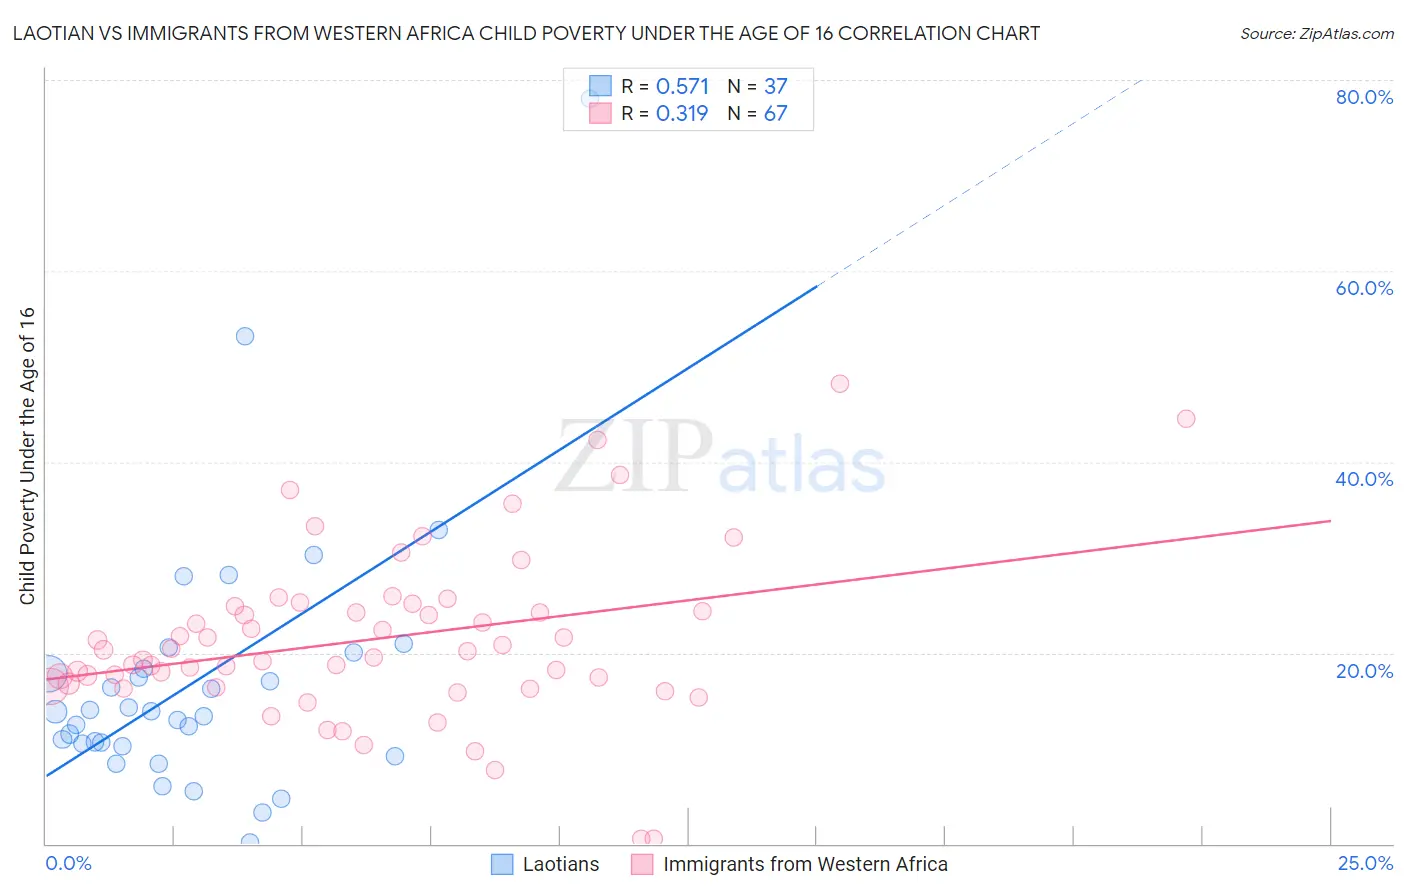 Laotian vs Immigrants from Western Africa Child Poverty Under the Age of 16